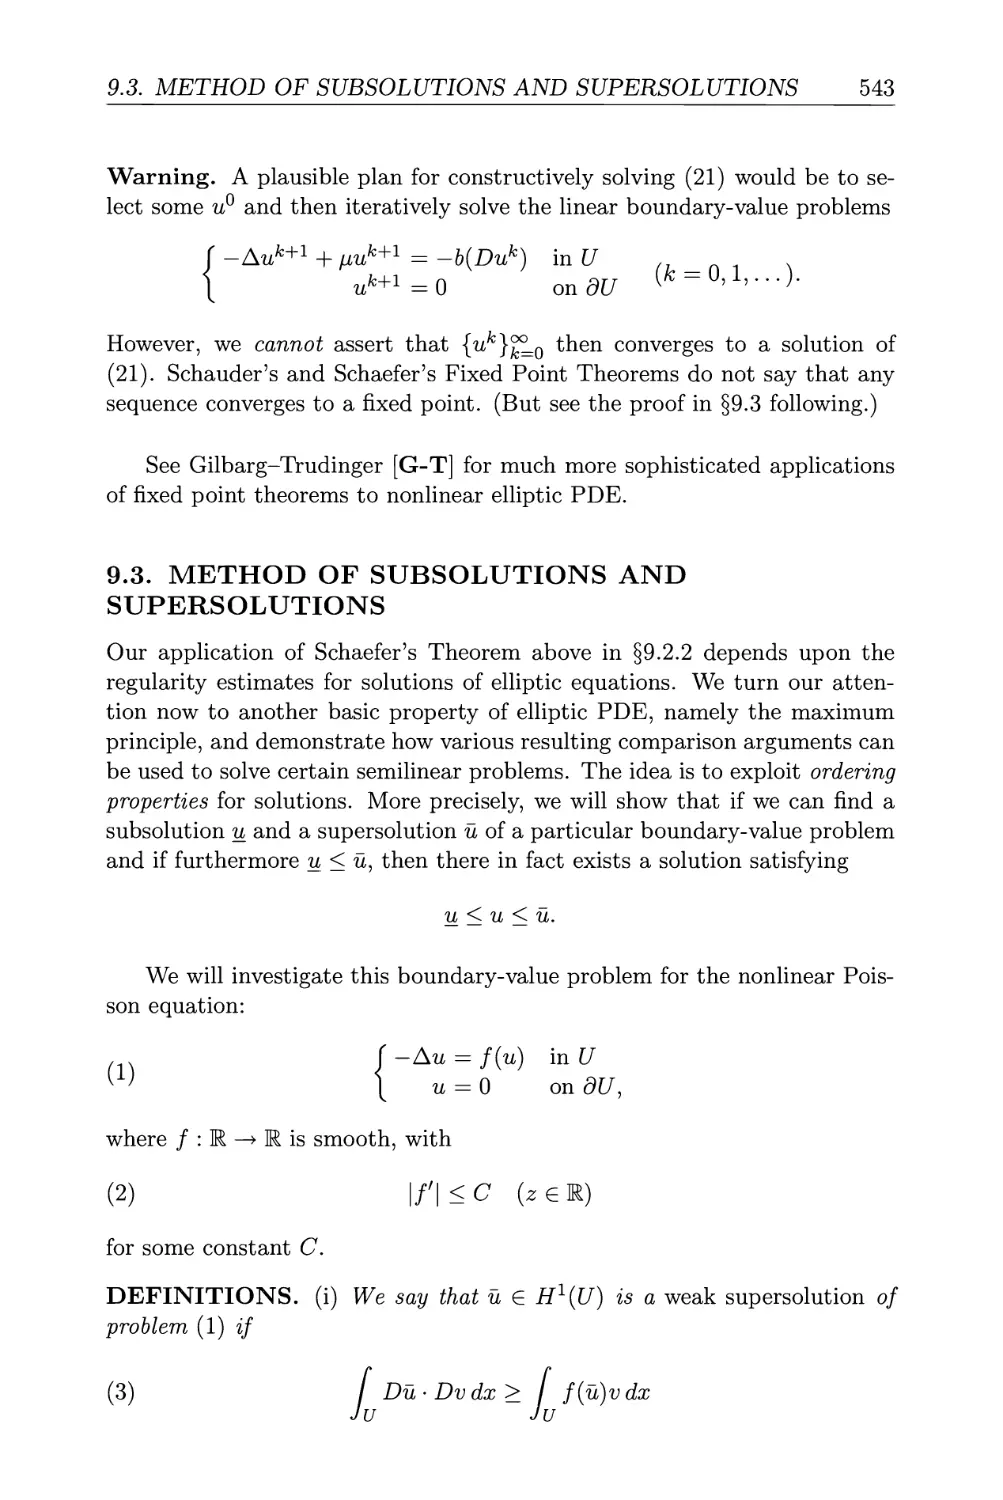 9.3. Method of subsolutions and supersolutions